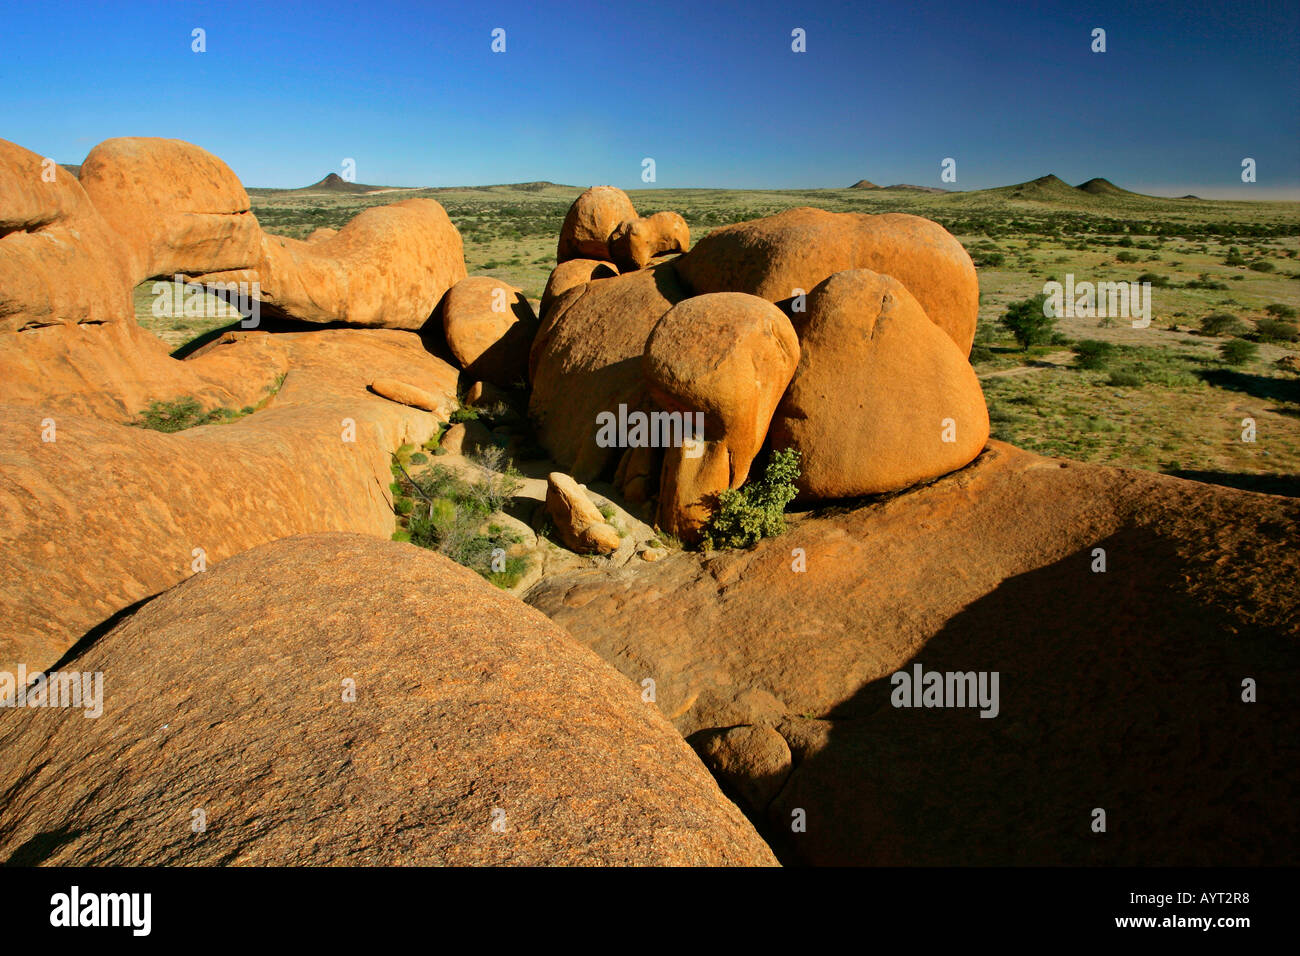 rock formations of red granite in the Spitzkoppe area Namibia Africa Stock Photo